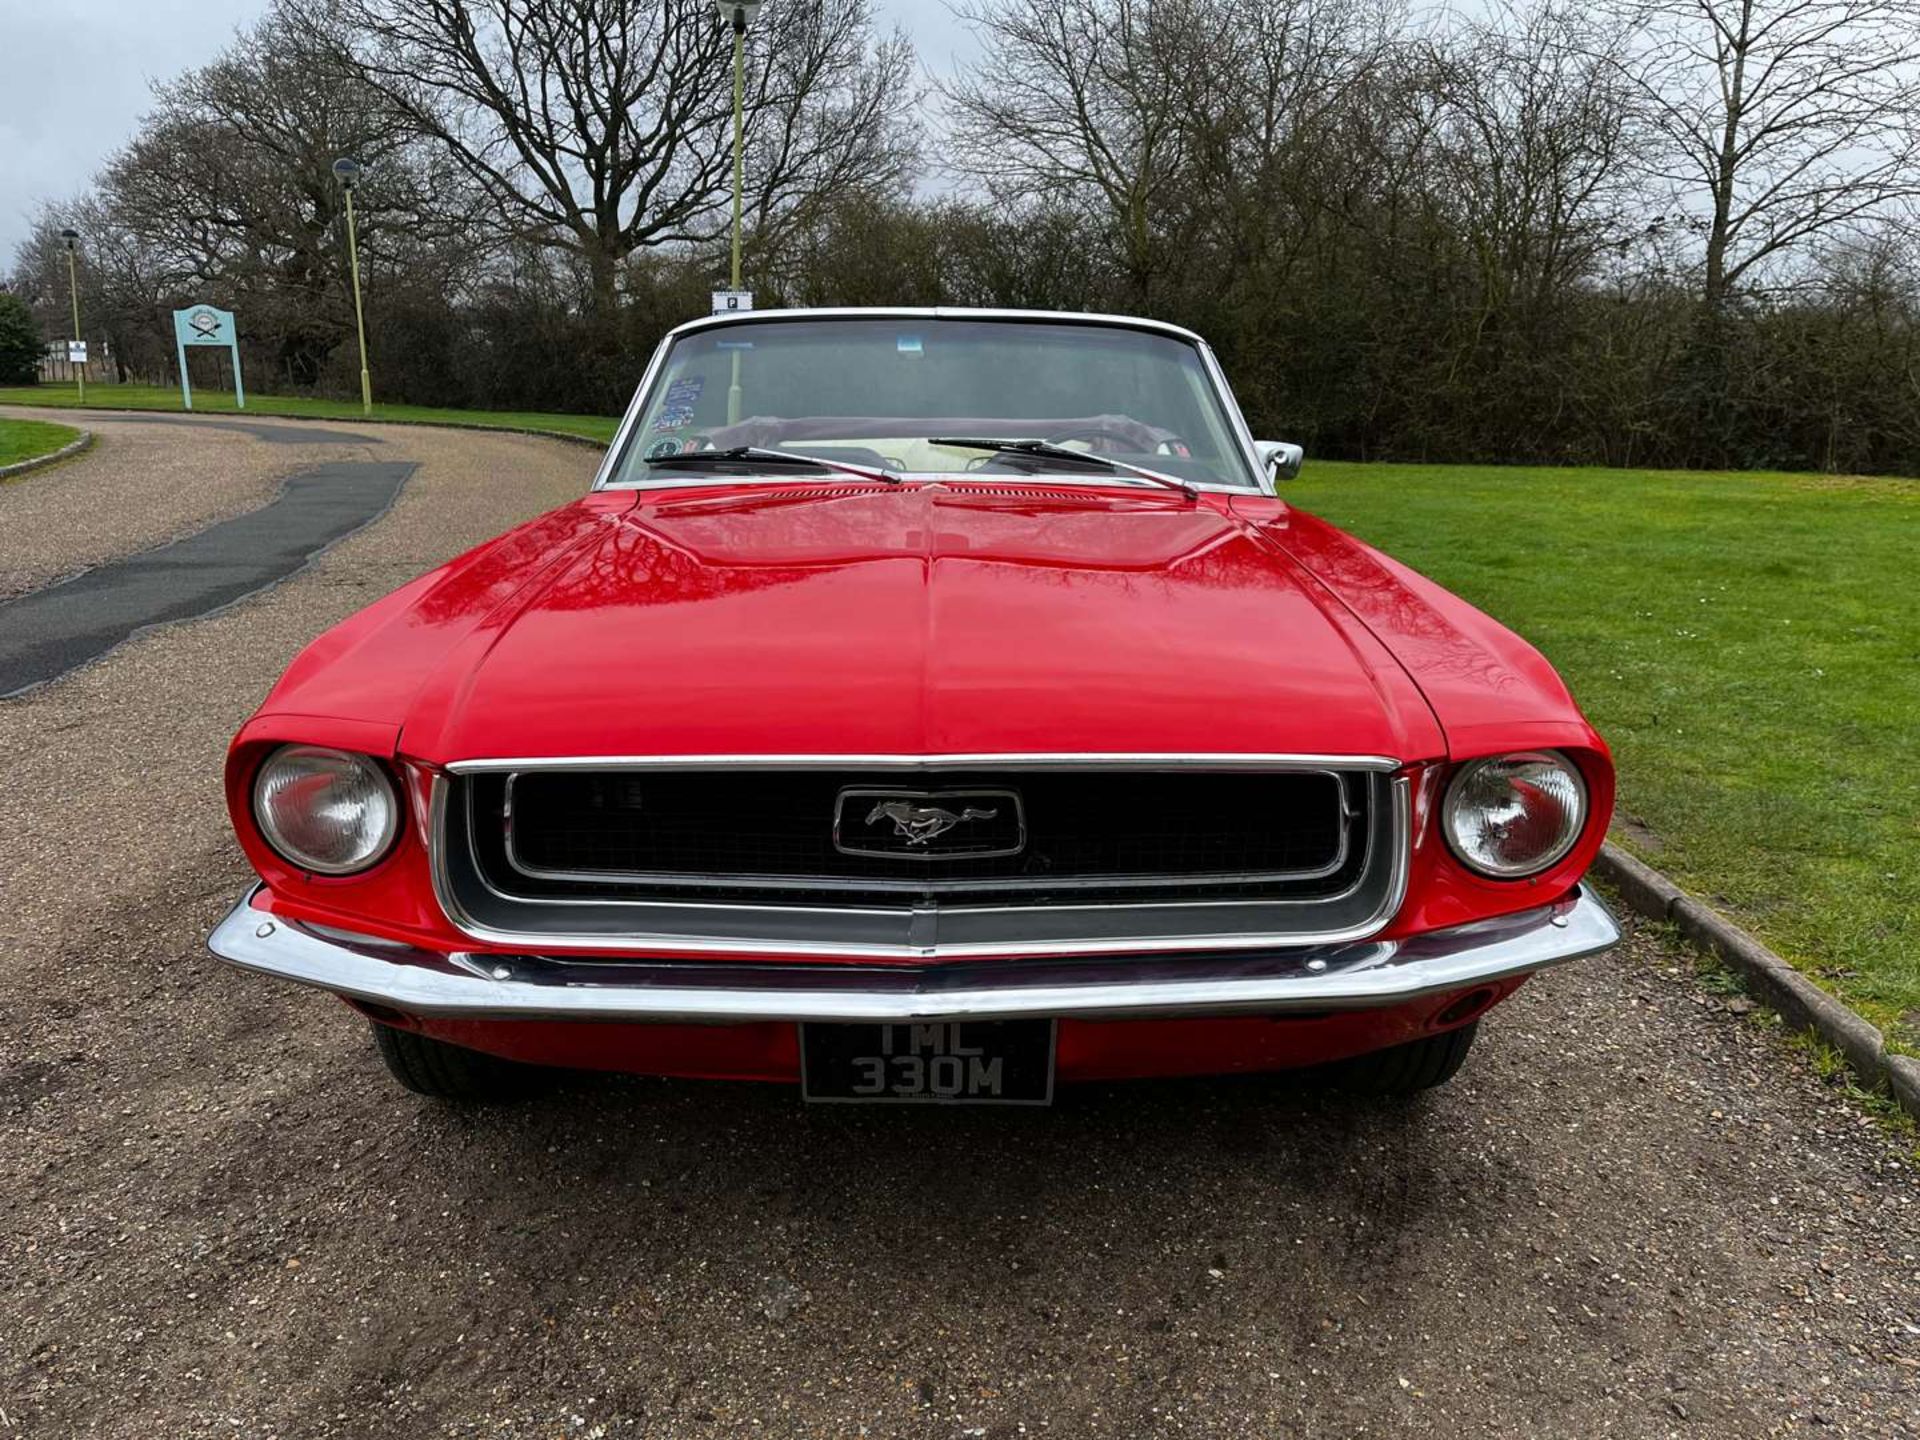 1968 FORD MUSTANG 4.7 V8 AUTO CONVERTIBLE LHD - Image 3 of 30